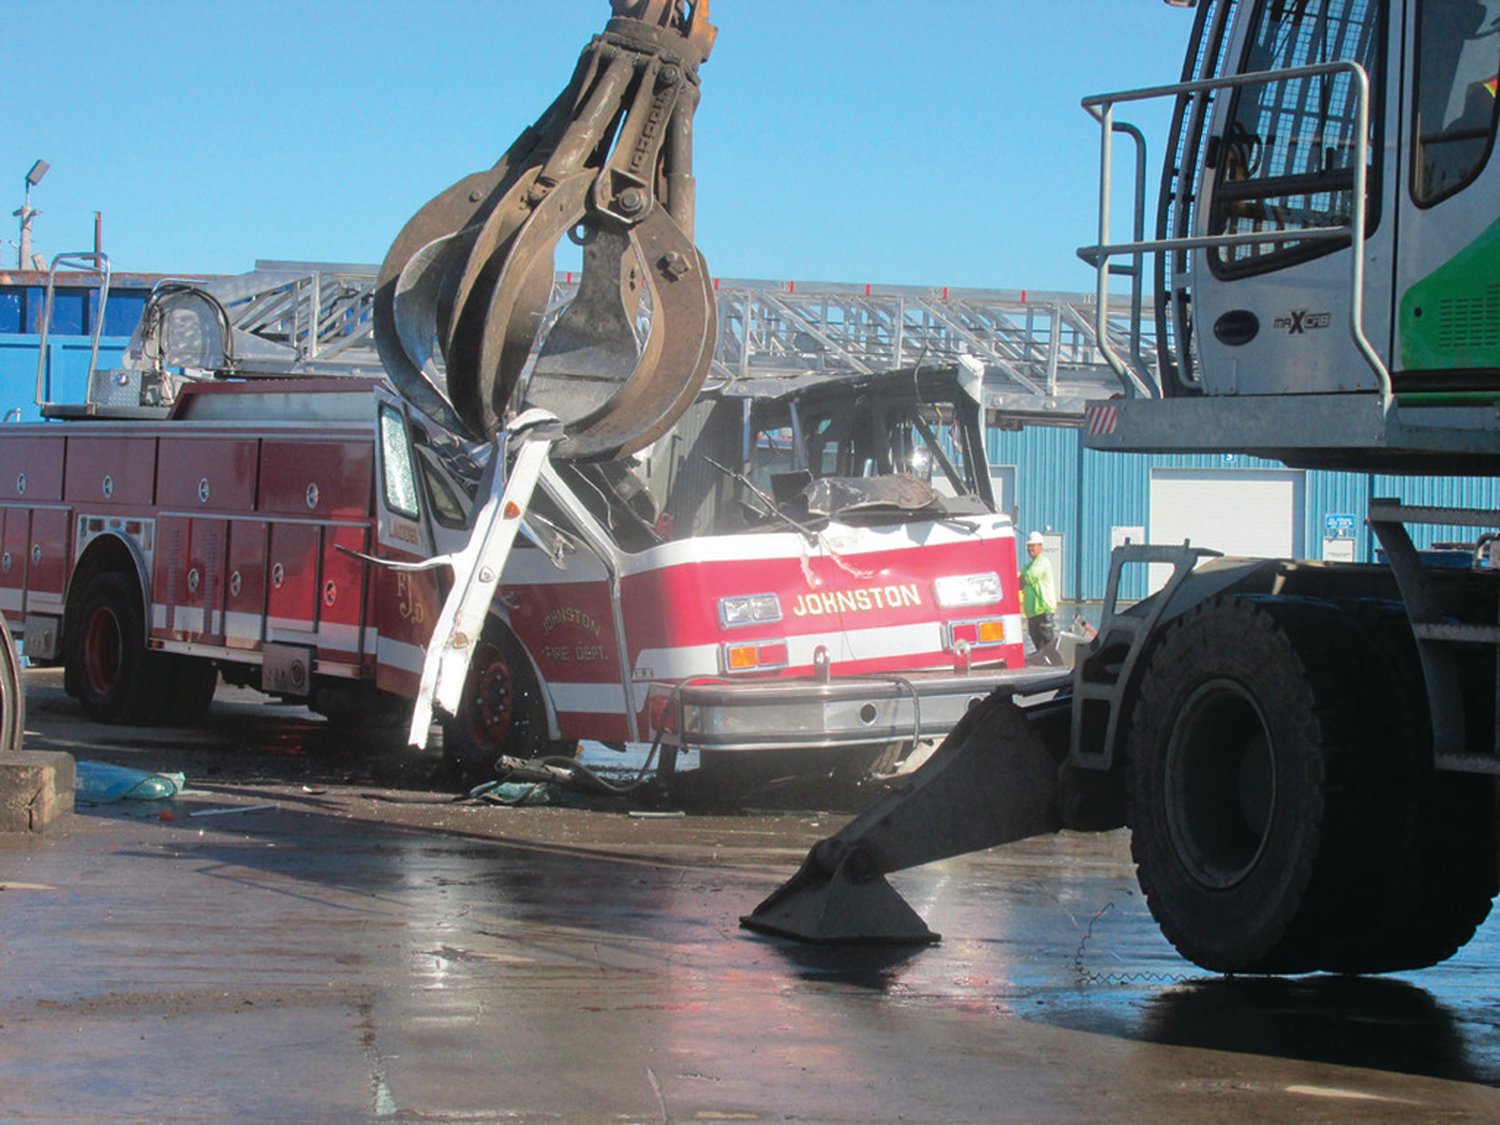 FOND FAREWELL: In 2015, the Johnston's 1991 ladder truck is crushed at the Sims Metals Recycling Center.